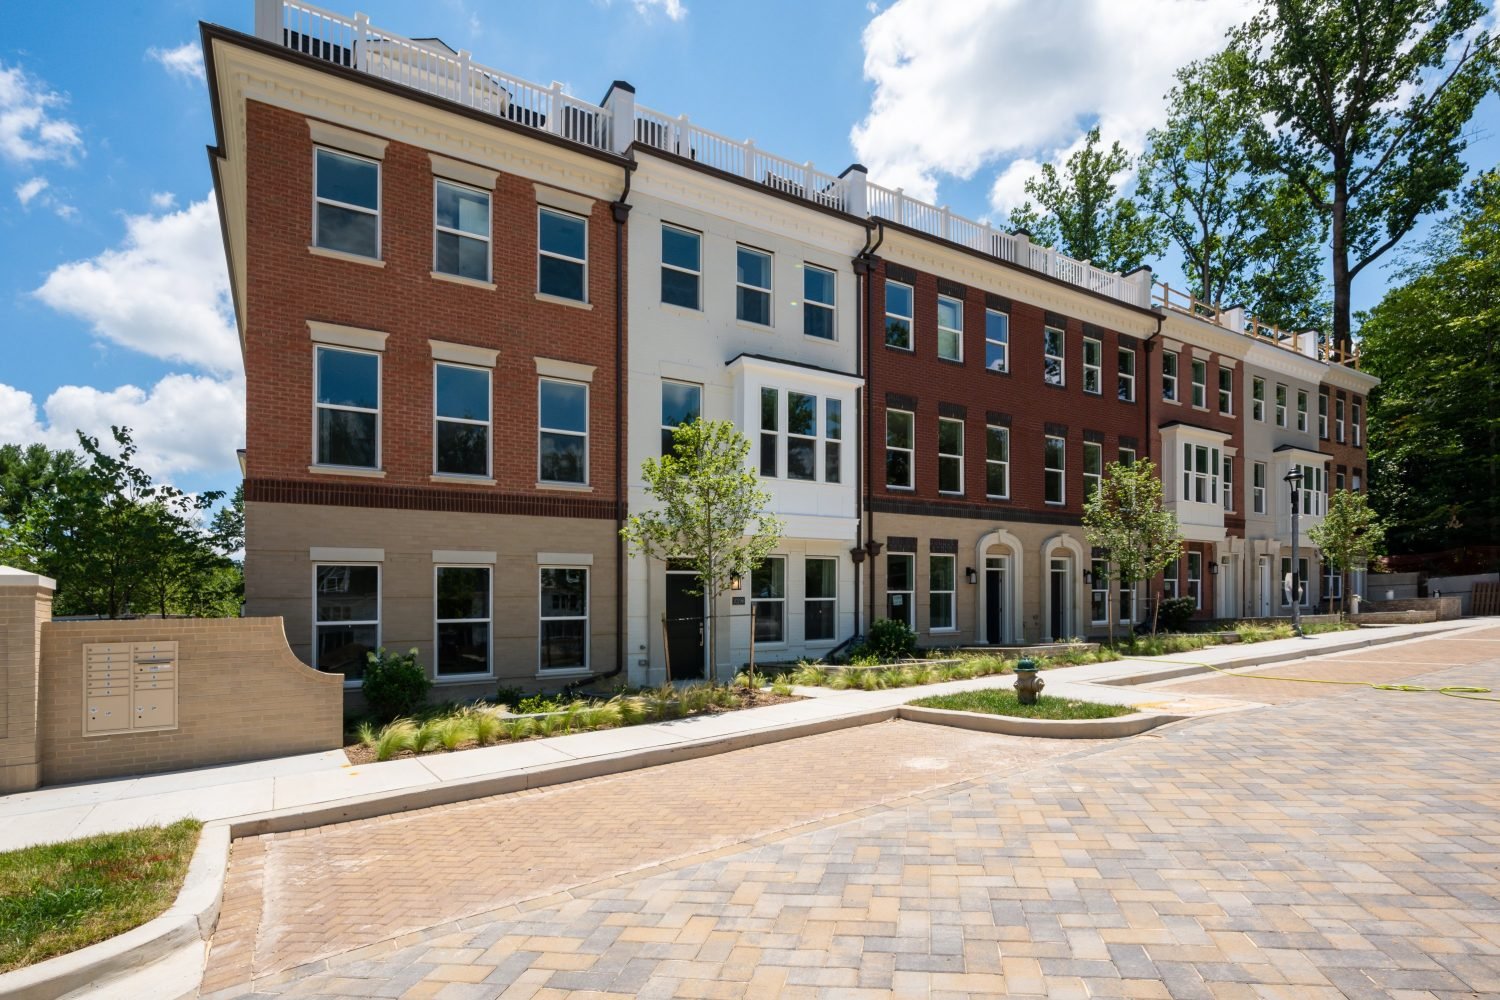 Close Out 2022 with a New Townhome in Bethesda